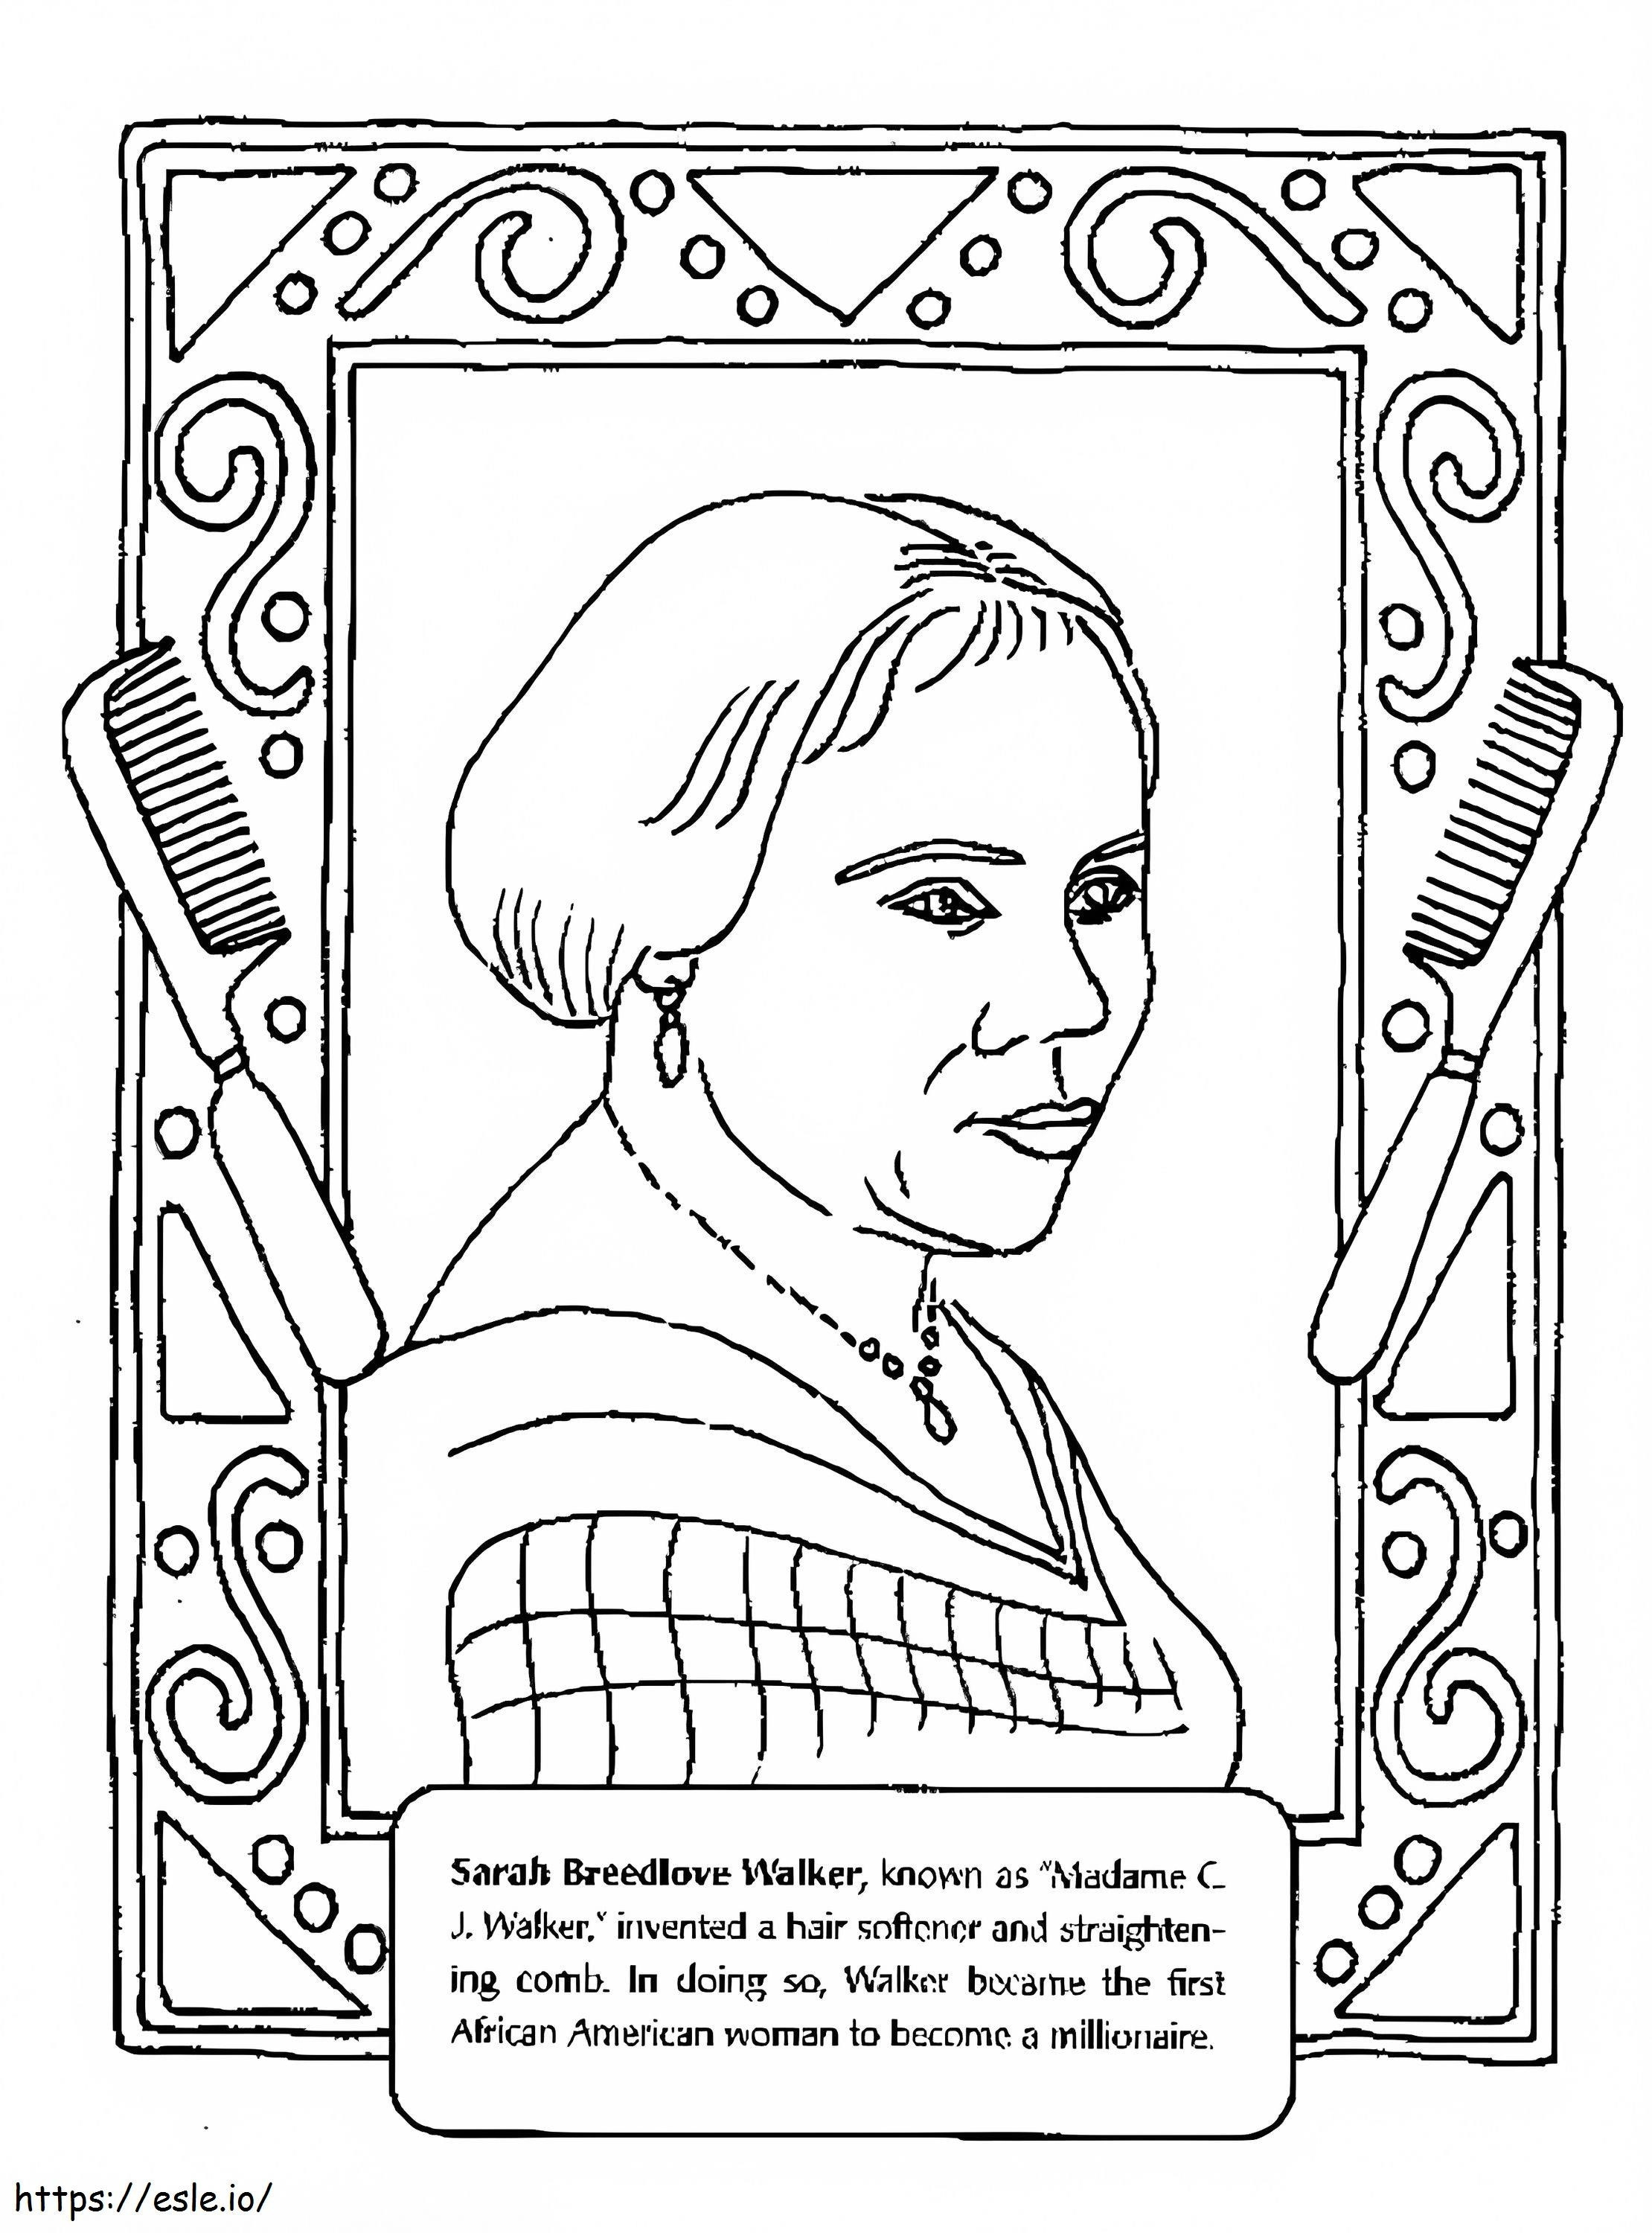 Black History Month 3 1 coloring page